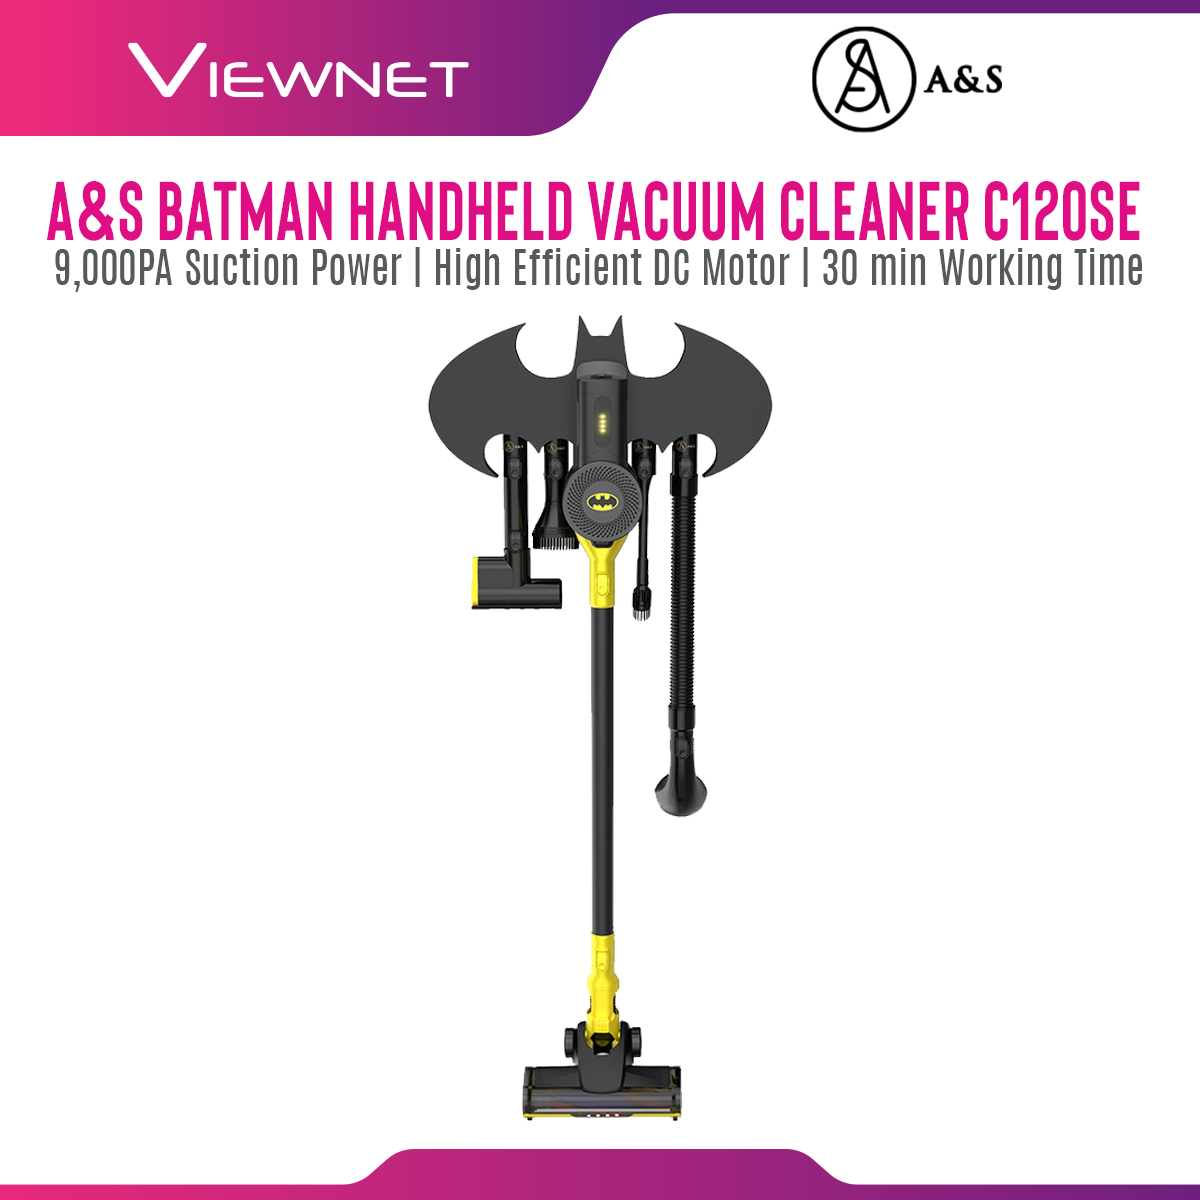 A&S C120SE Batman Edition Handheld Vacuum Cleaner with 9,000PA Suction Power, High Efficient DC Motor, 30 Min Working Time, HEPA Filter